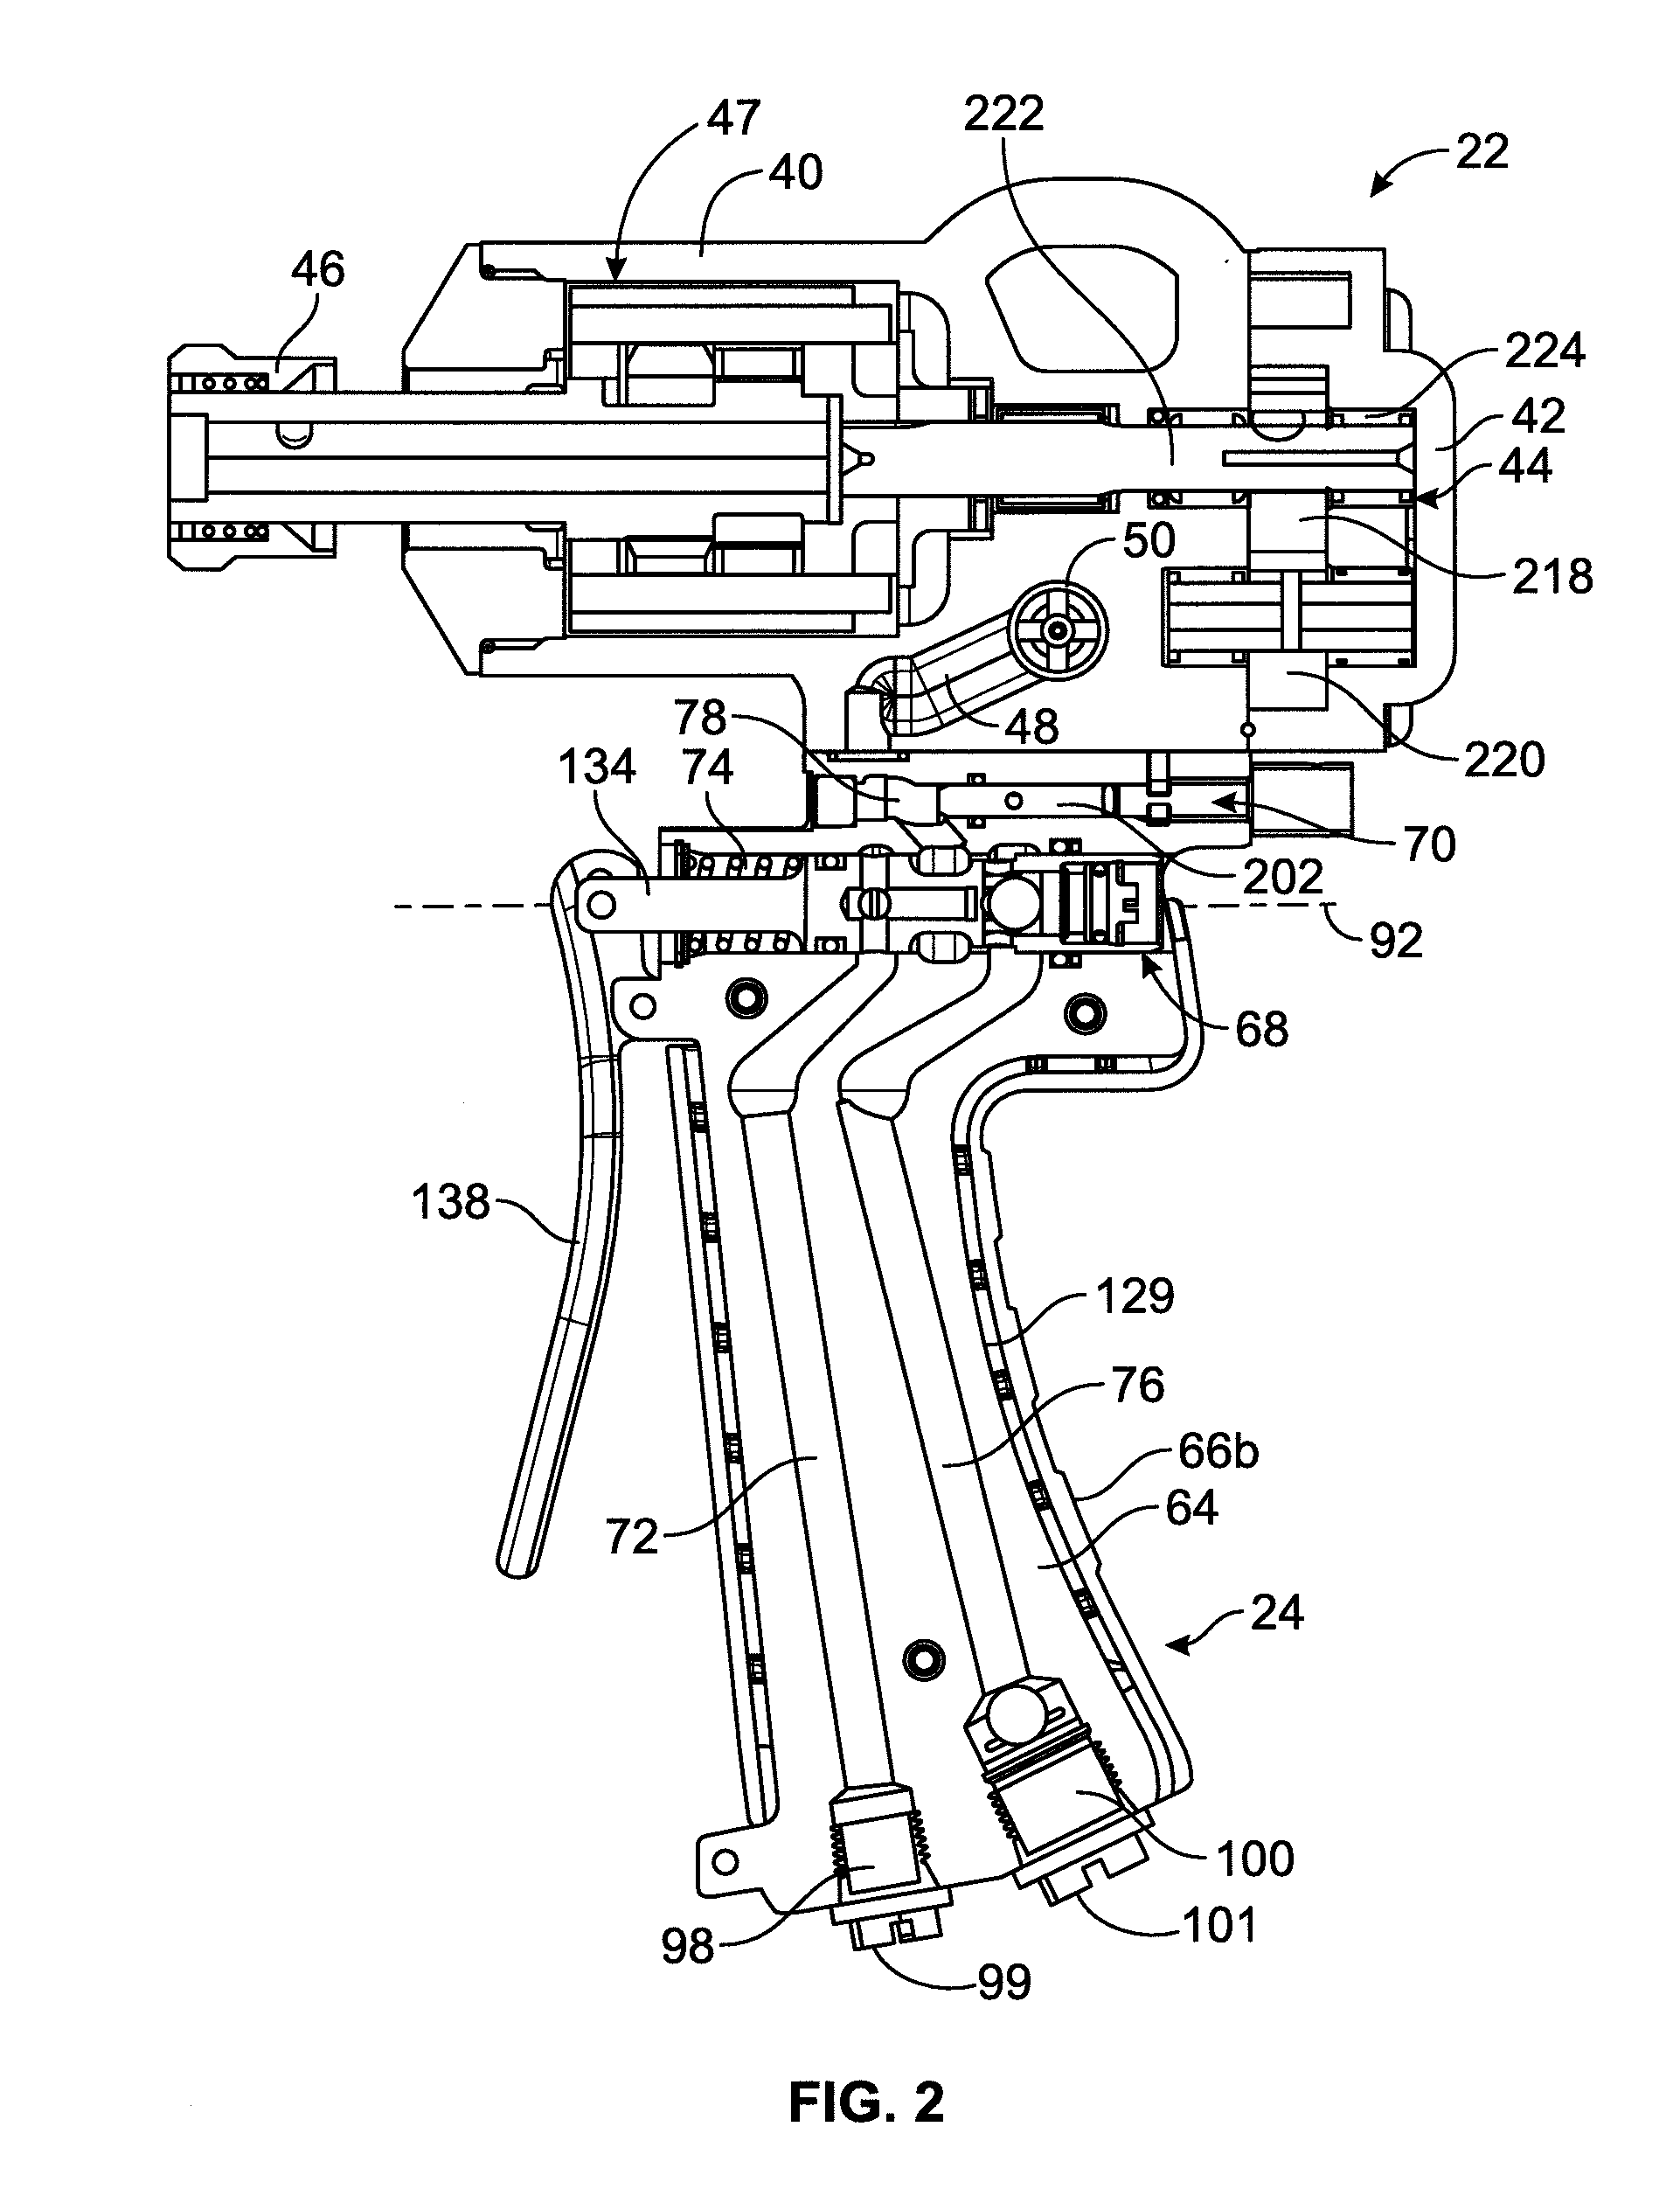 Hydraulically Operated Tool Including A Bypass Assembly